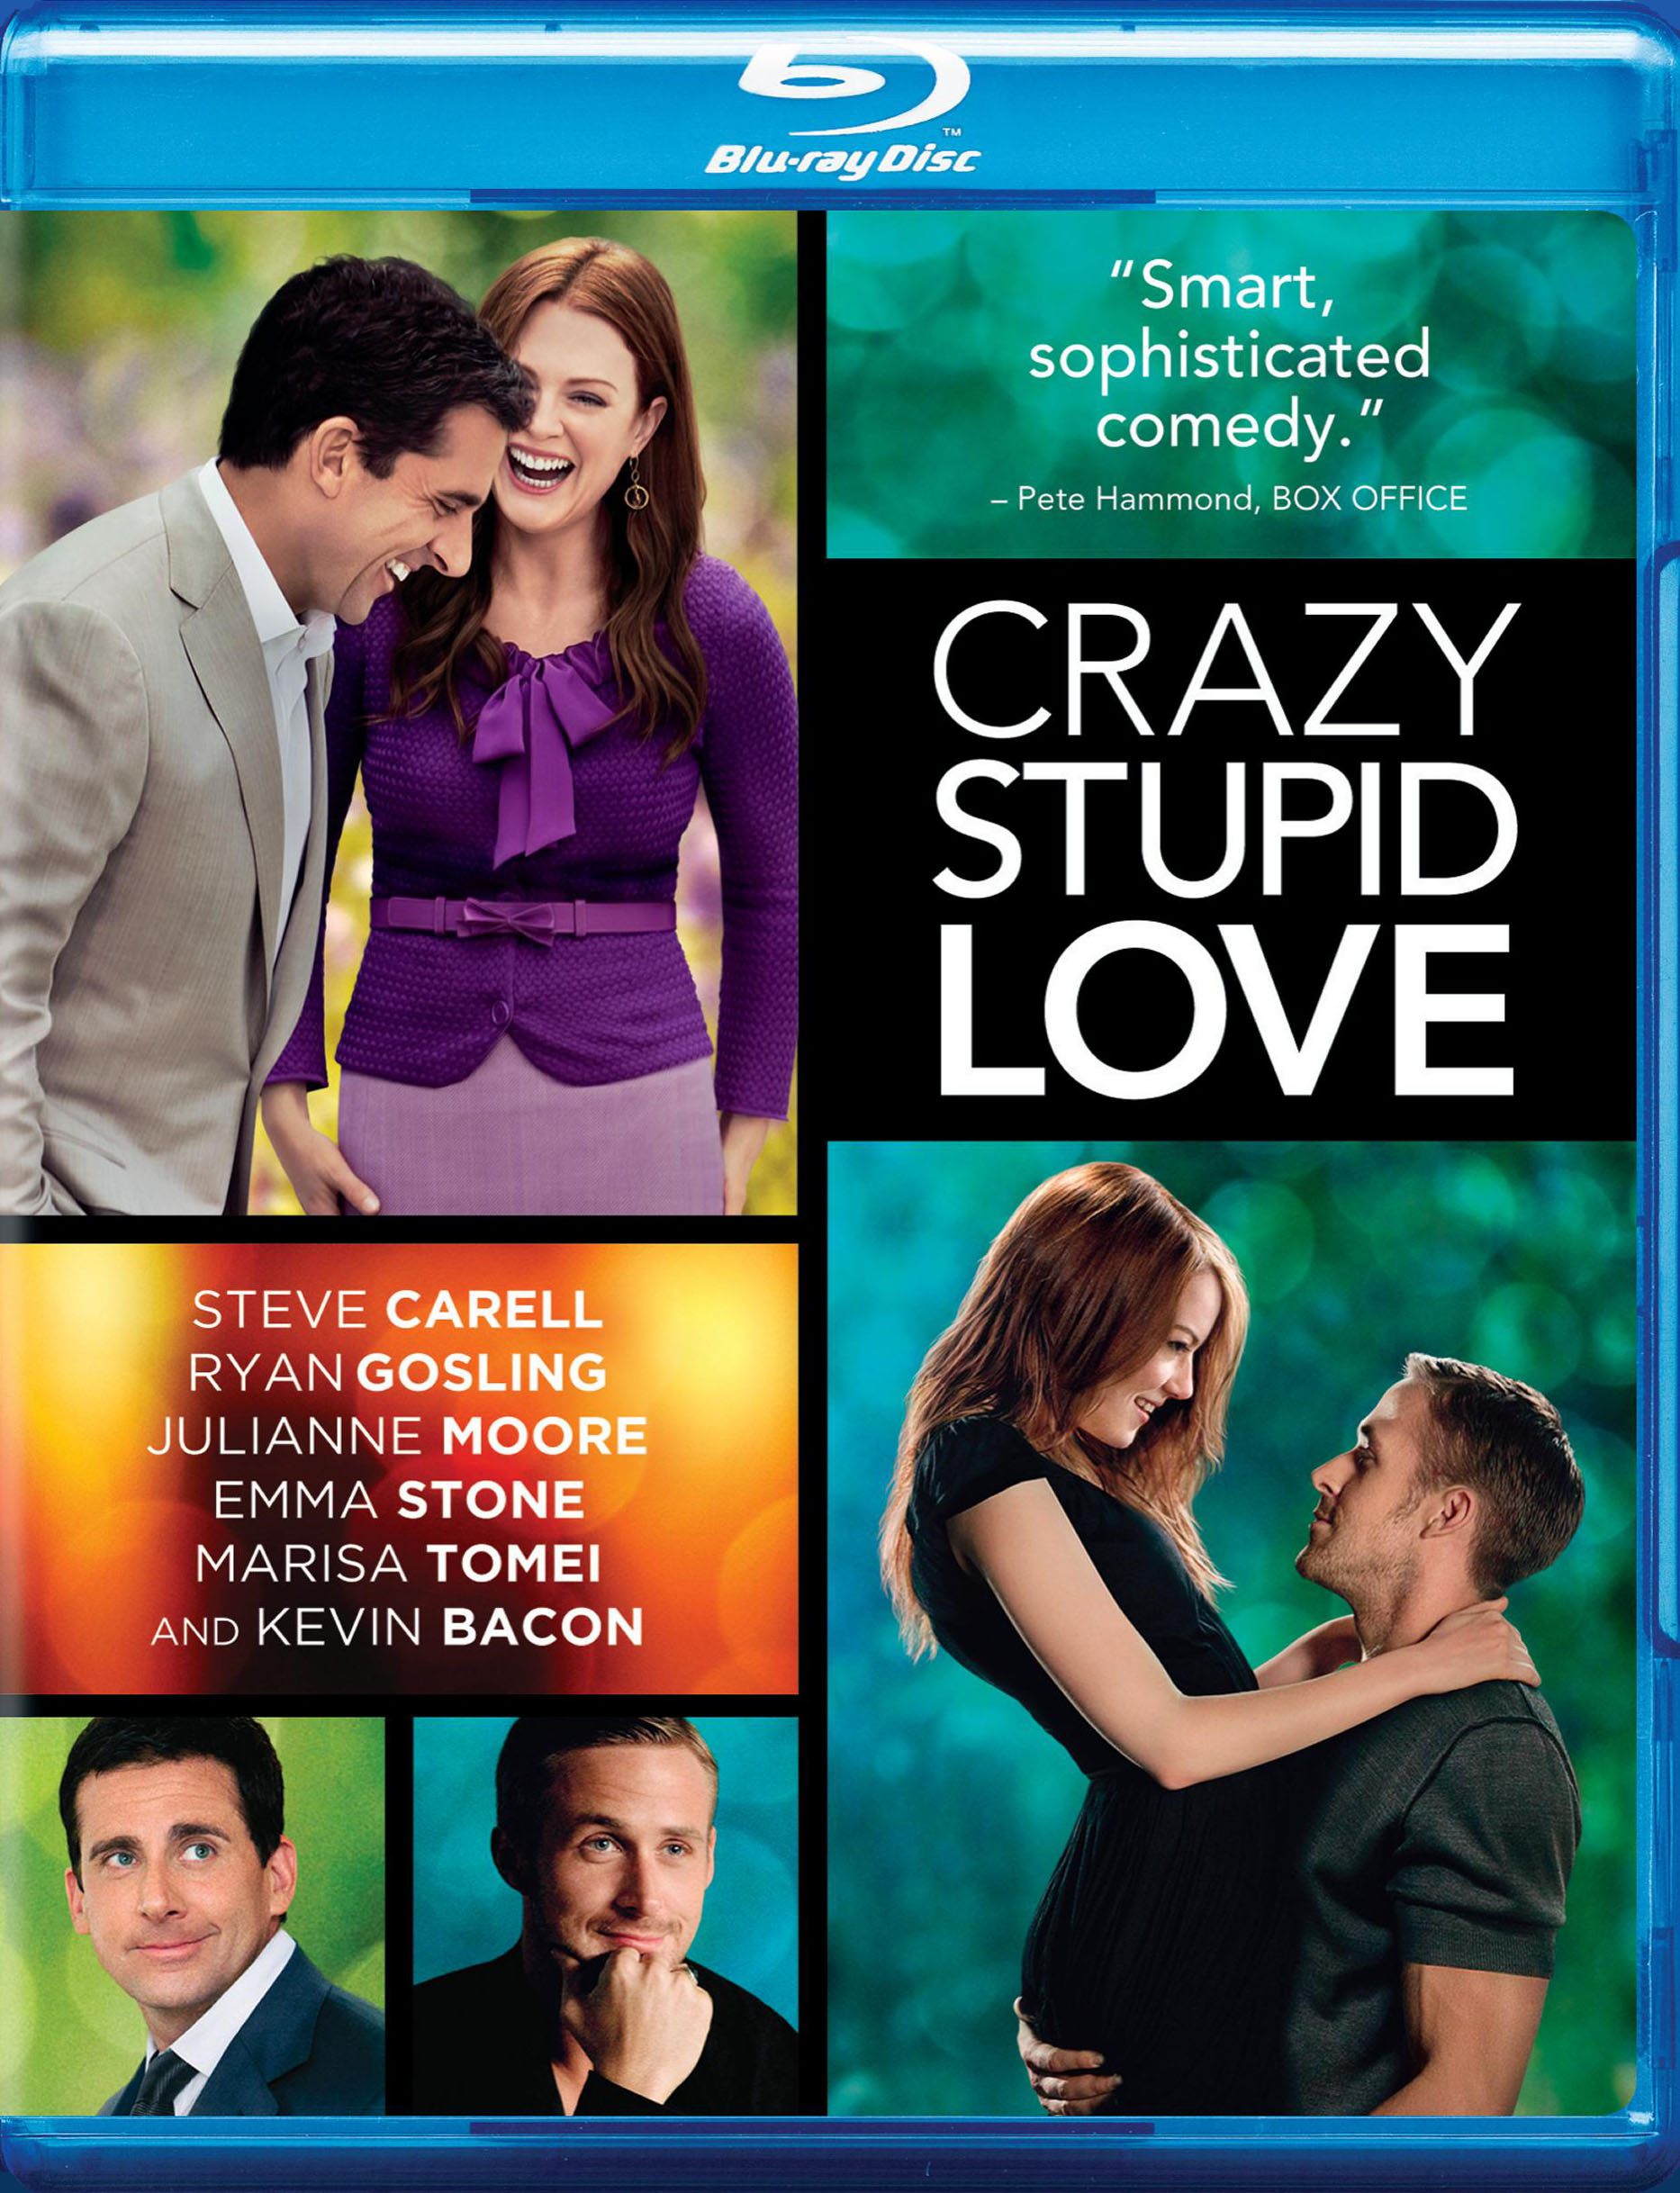 Download crazy stupid love movie for mobile pc